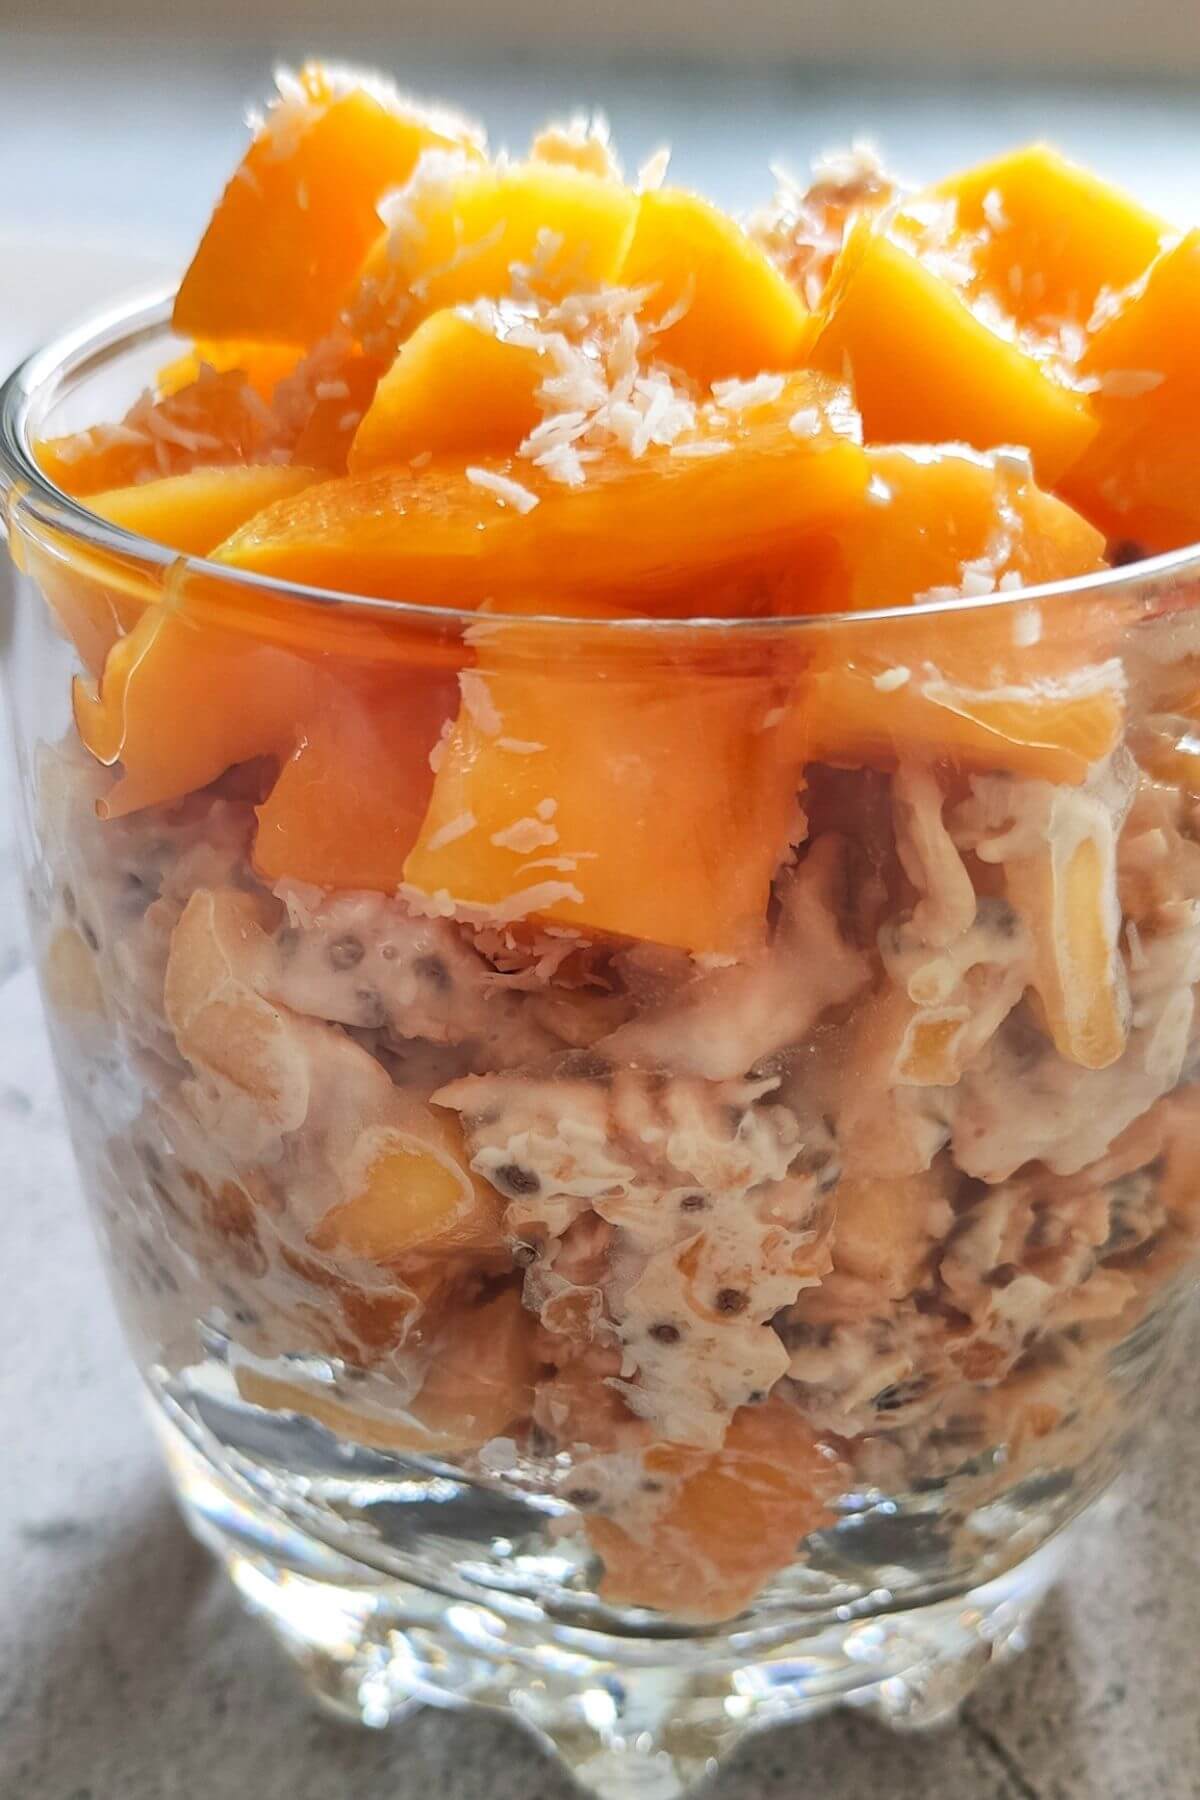 Mango overnight oats in a glass bowl